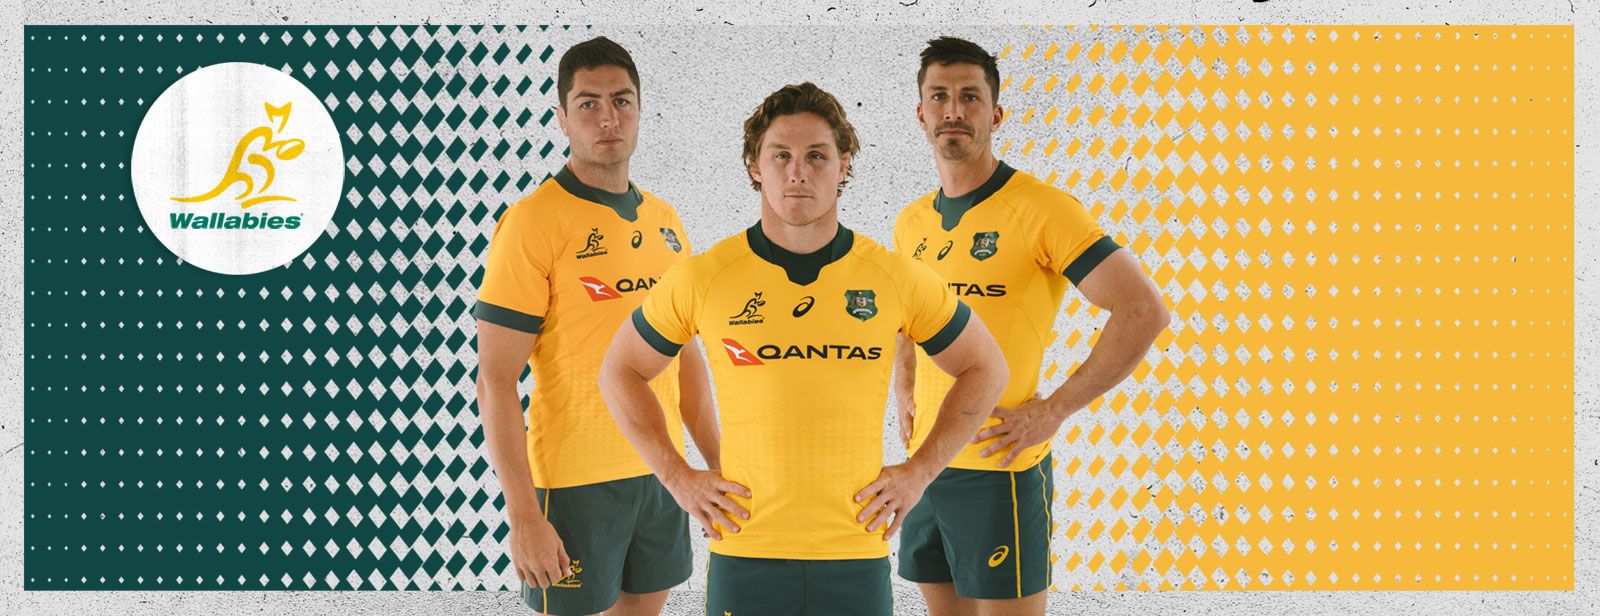 shop the wallabies rugby world cup range